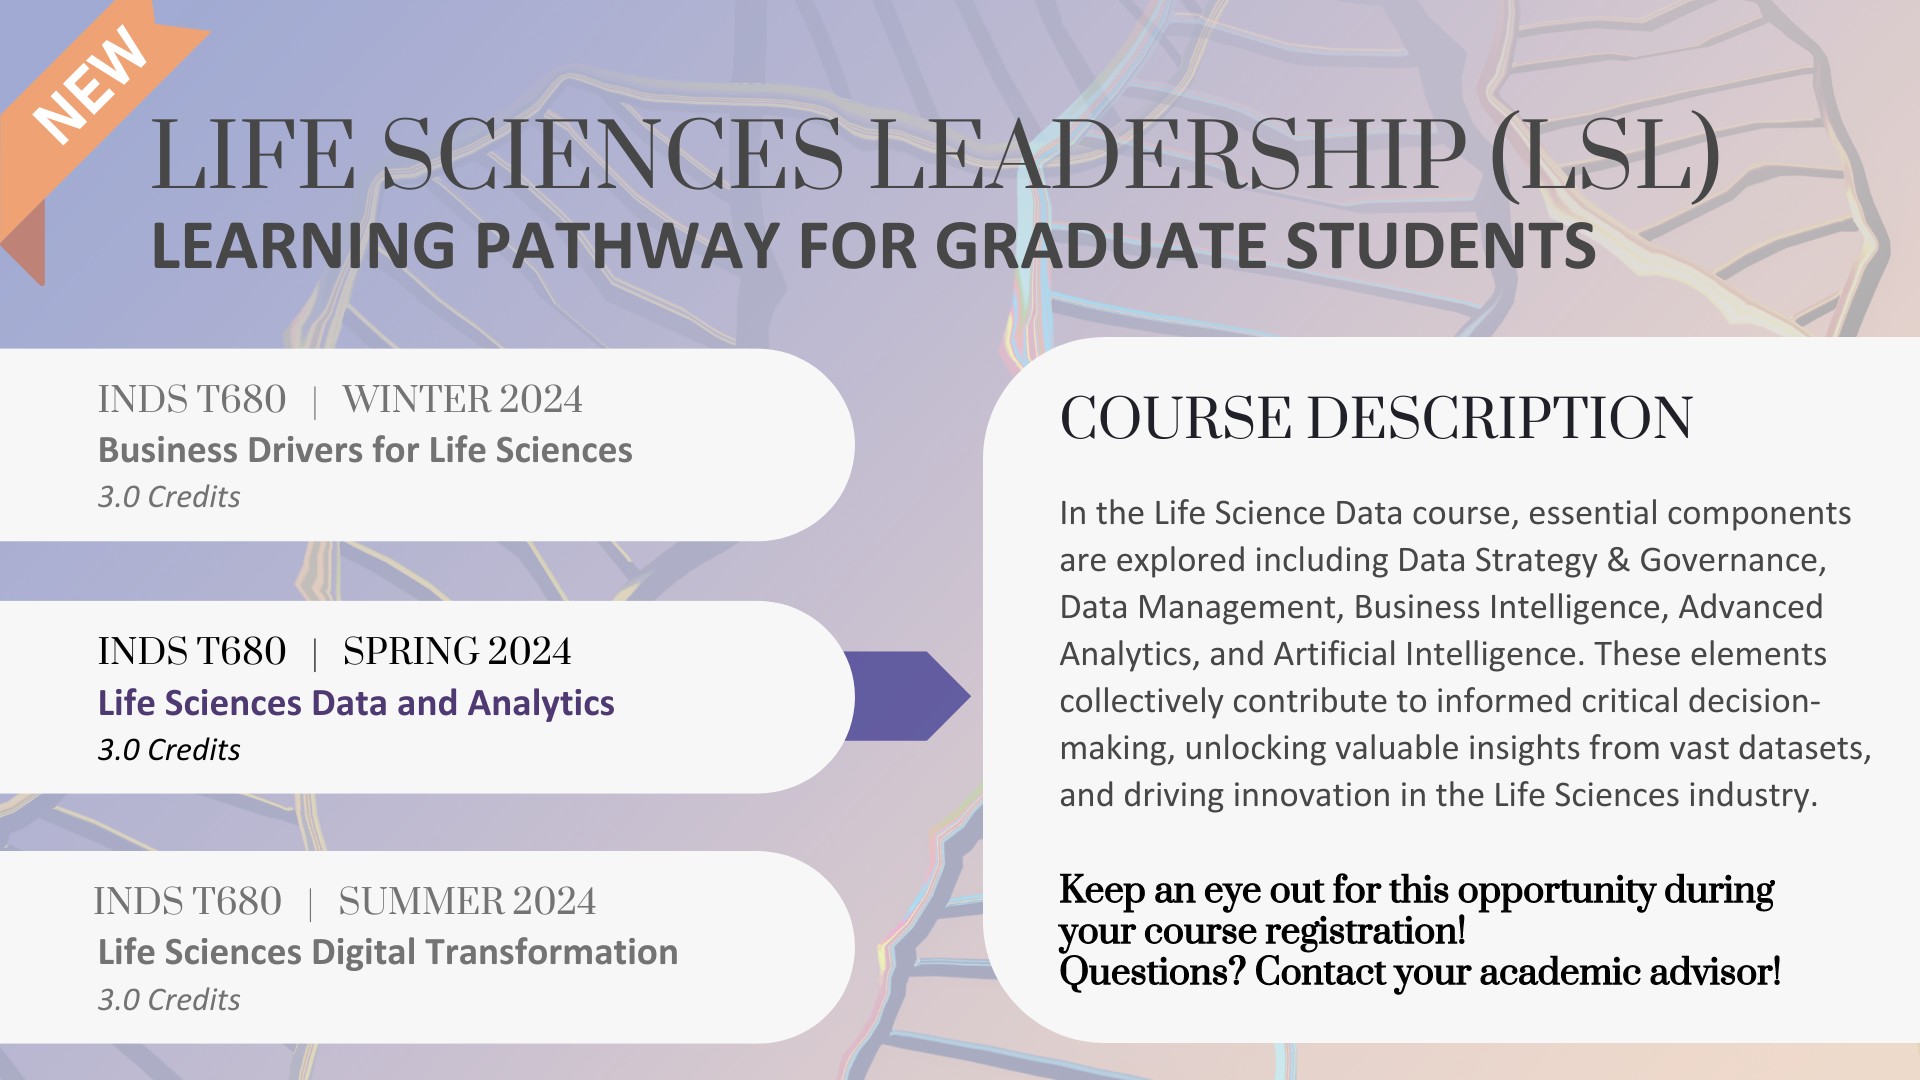 Life Sciences Leadership Learning Pathway